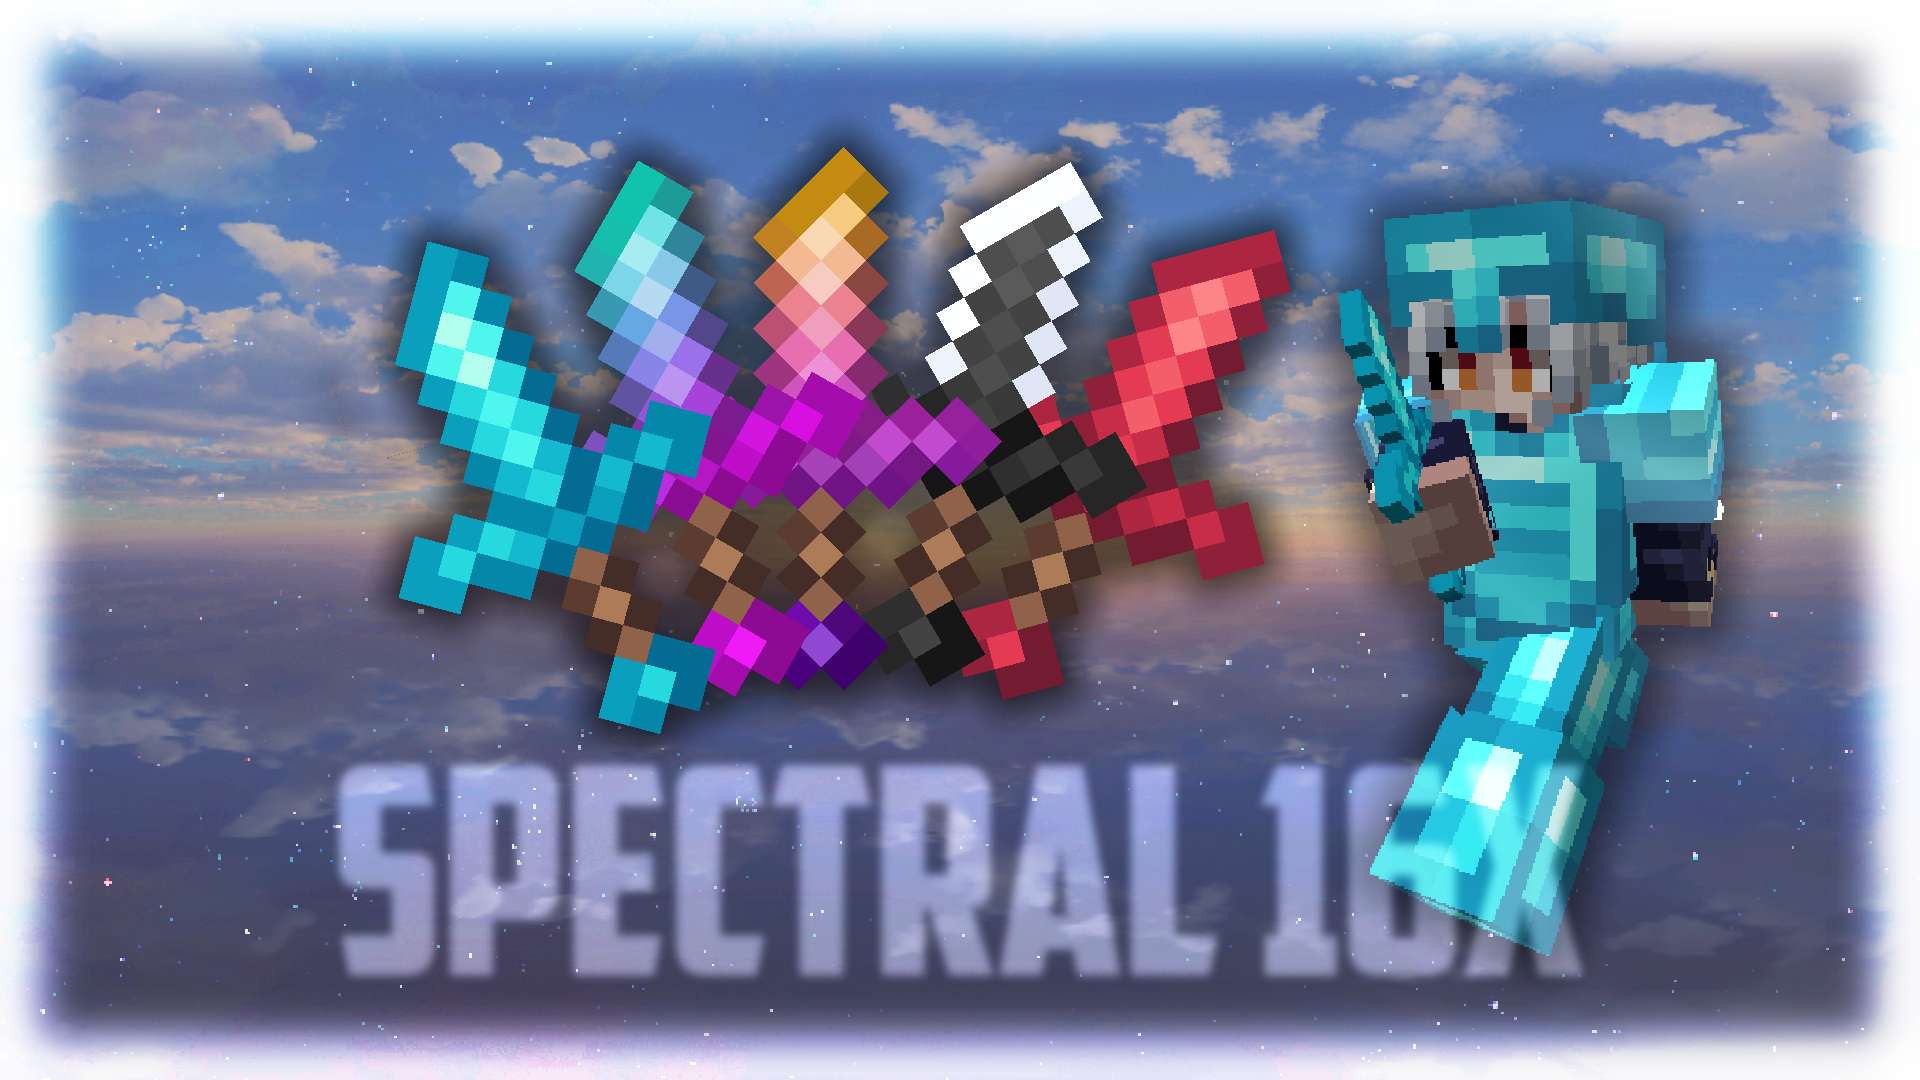 Spectral - Marine 16 by Zlax on PvPRP